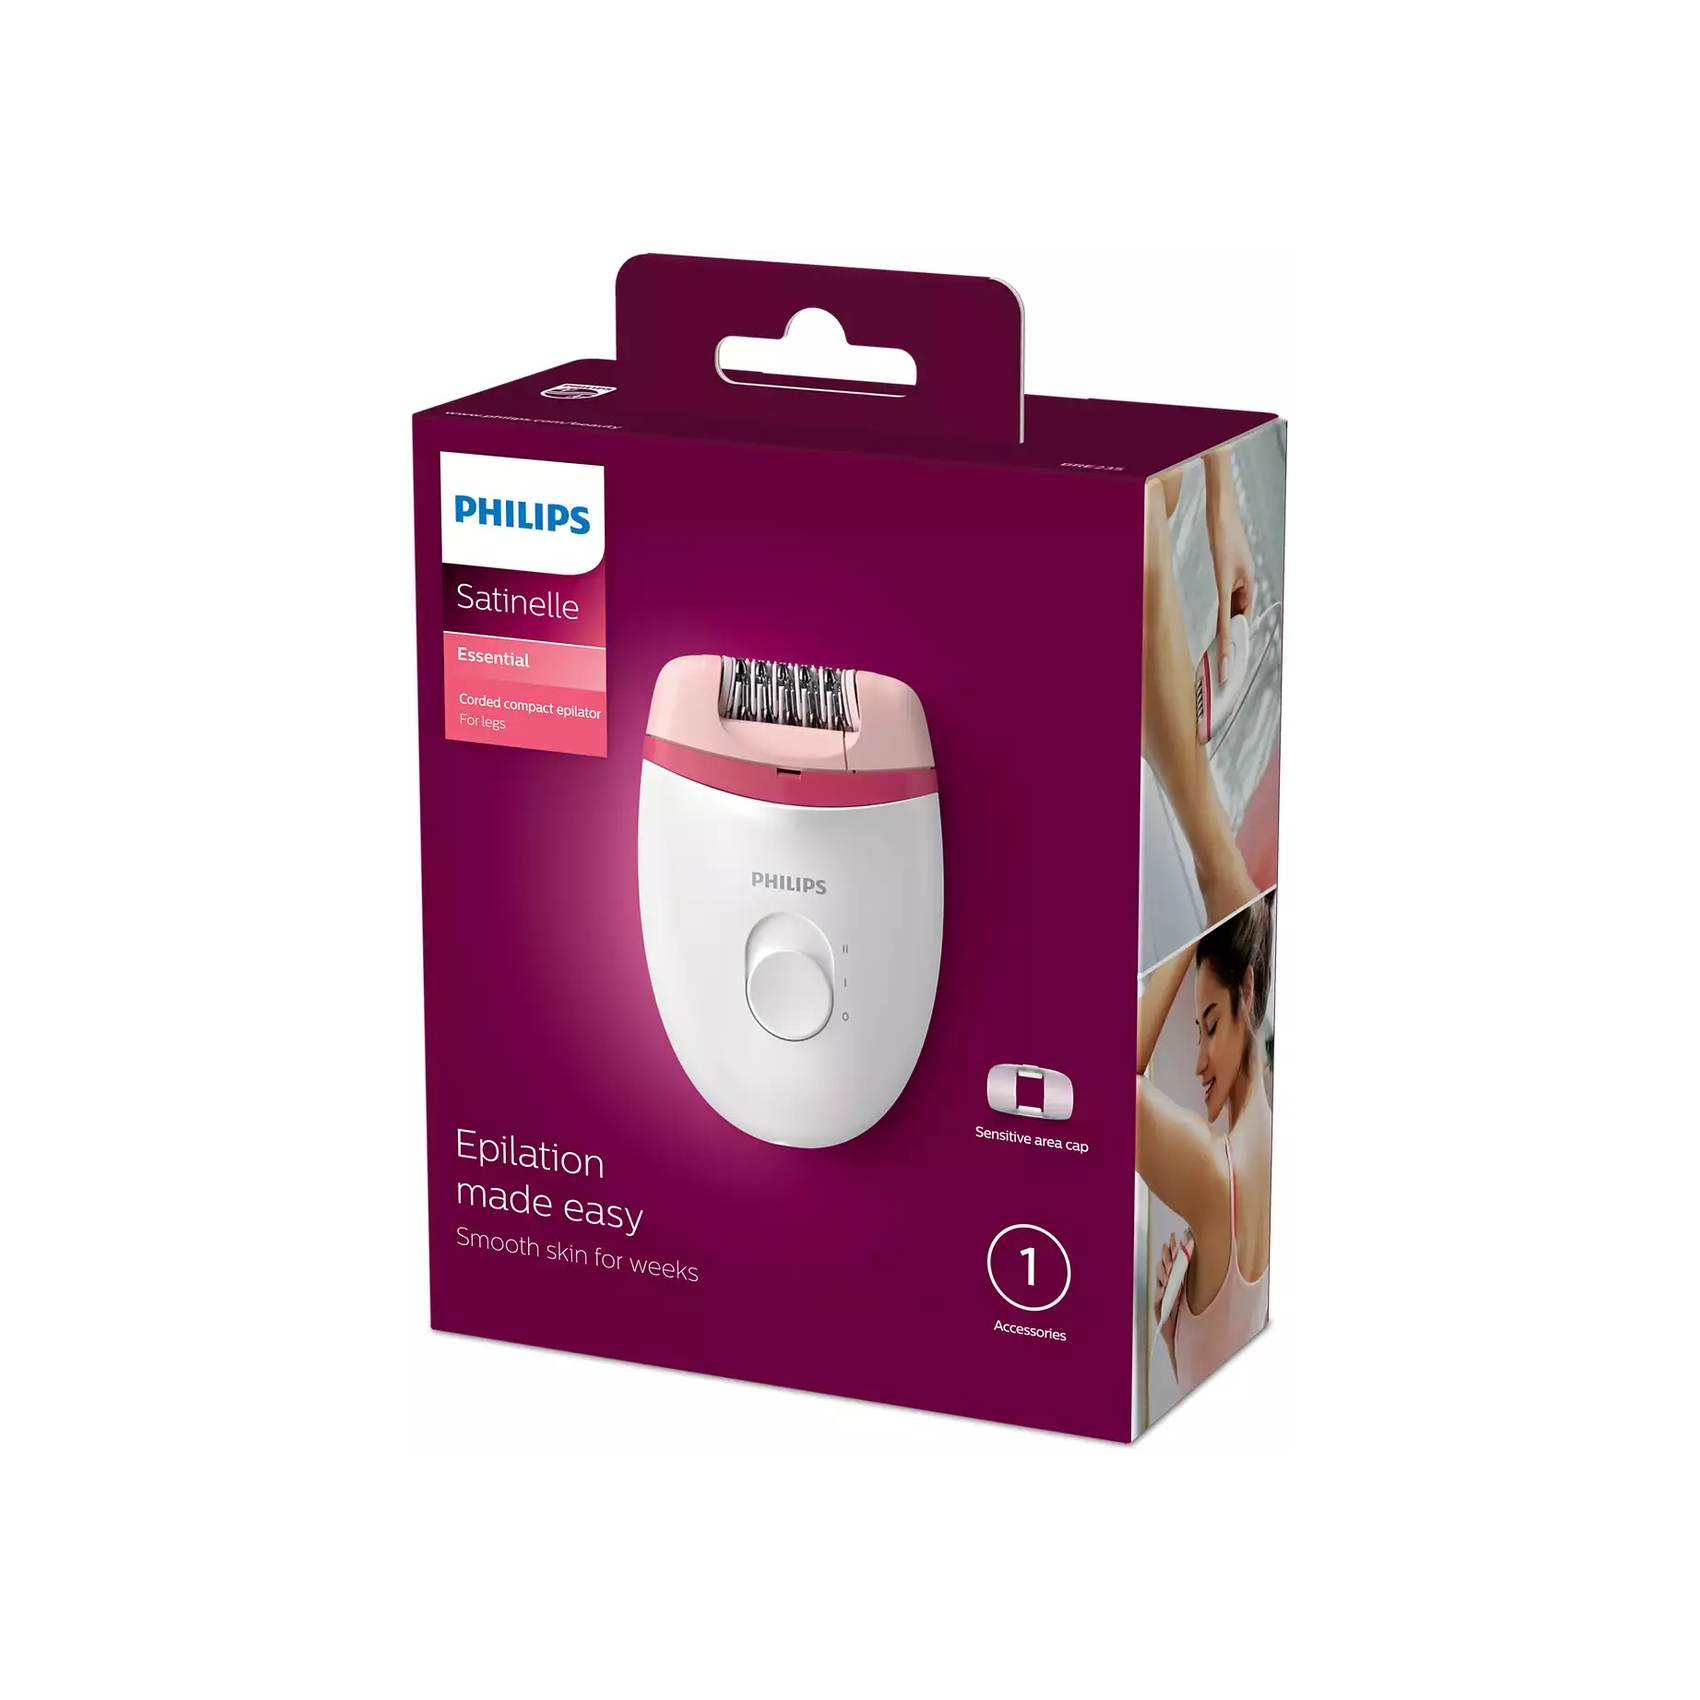 Philips Satinelle Essential Corded Compact Epilator - White/Pink (Photo: 3)